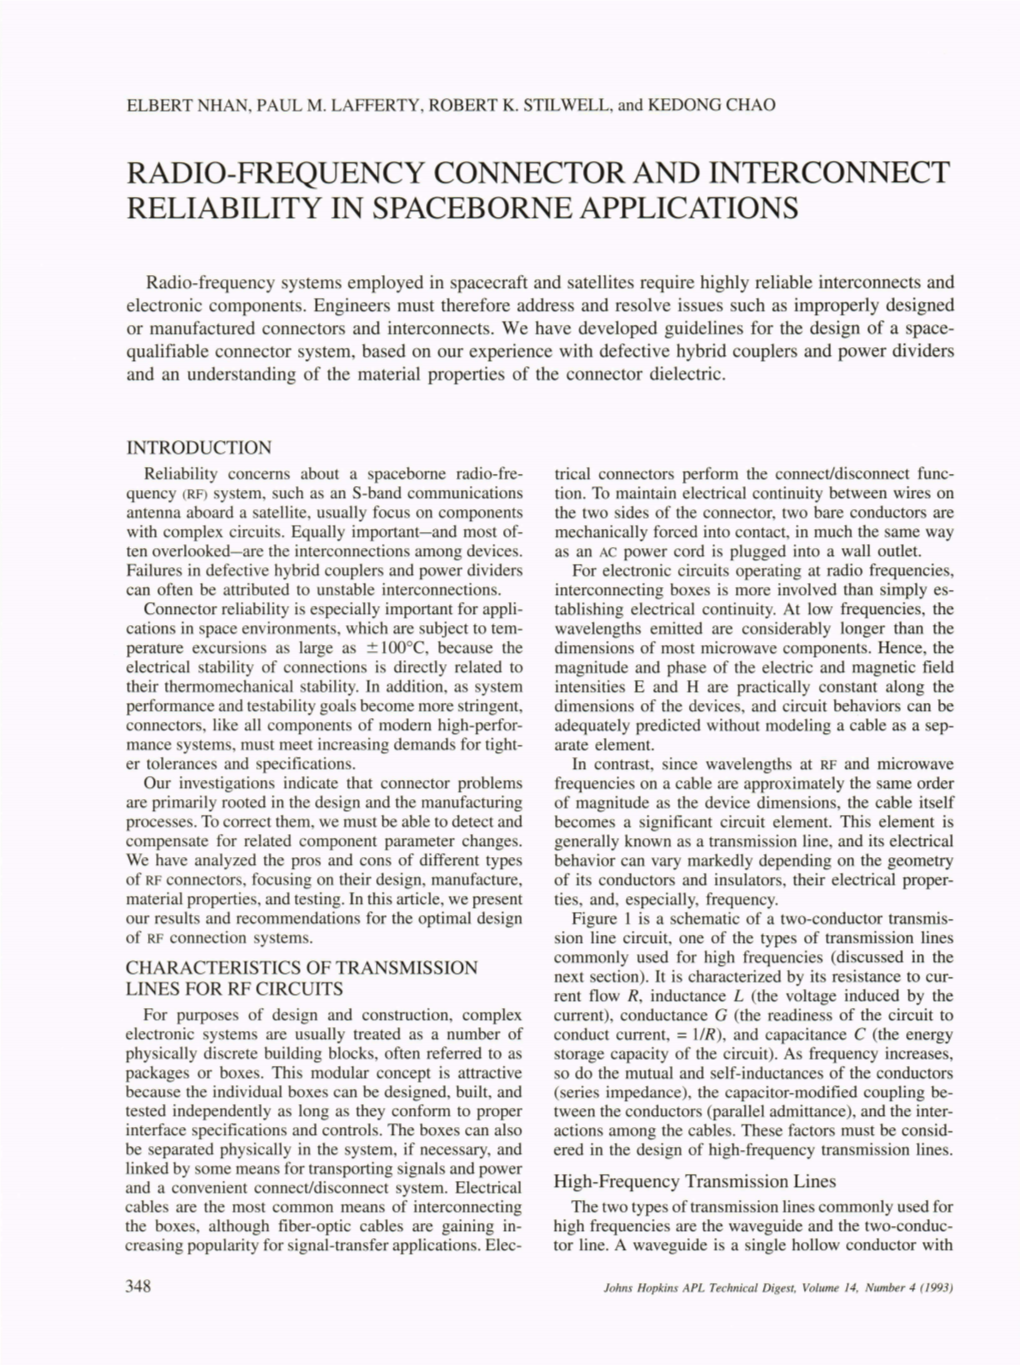 Radio-Frequency Connector and Interconnect Reliability in Spaceborne Applications